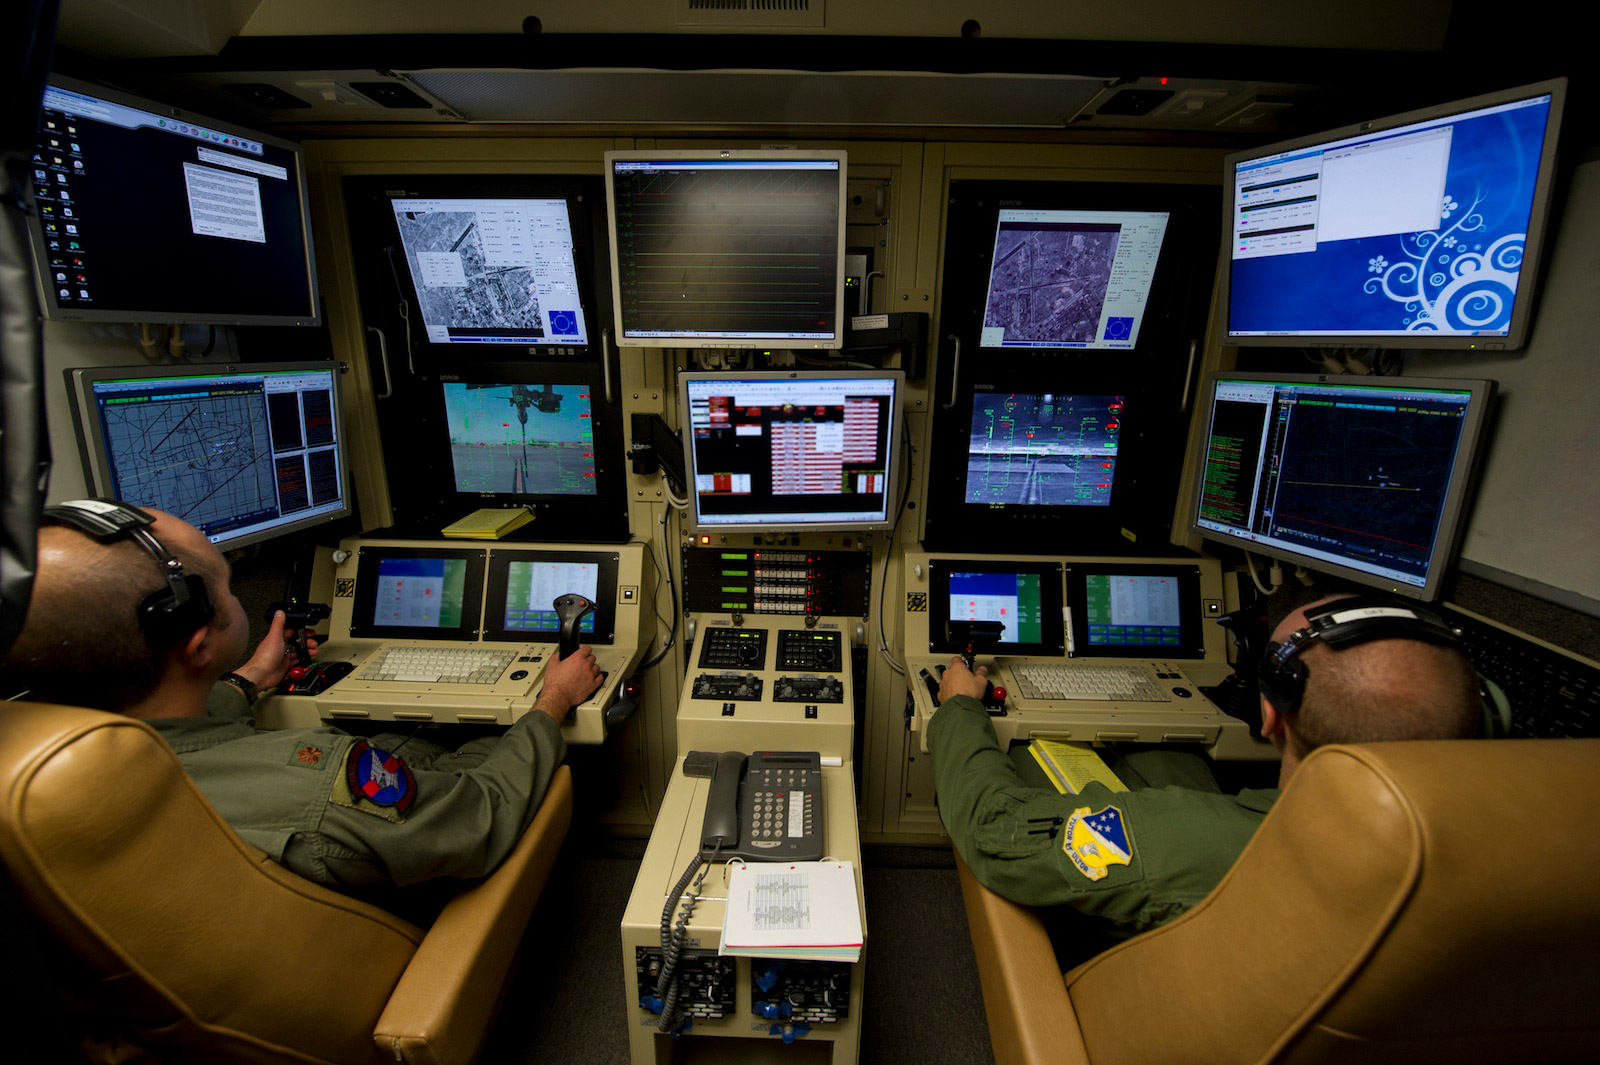 Two US airmen training to operate the MQ-9 Reaper drone at a ground control station at Holloman Air Force Base, New Mexico, 3 October 2012.